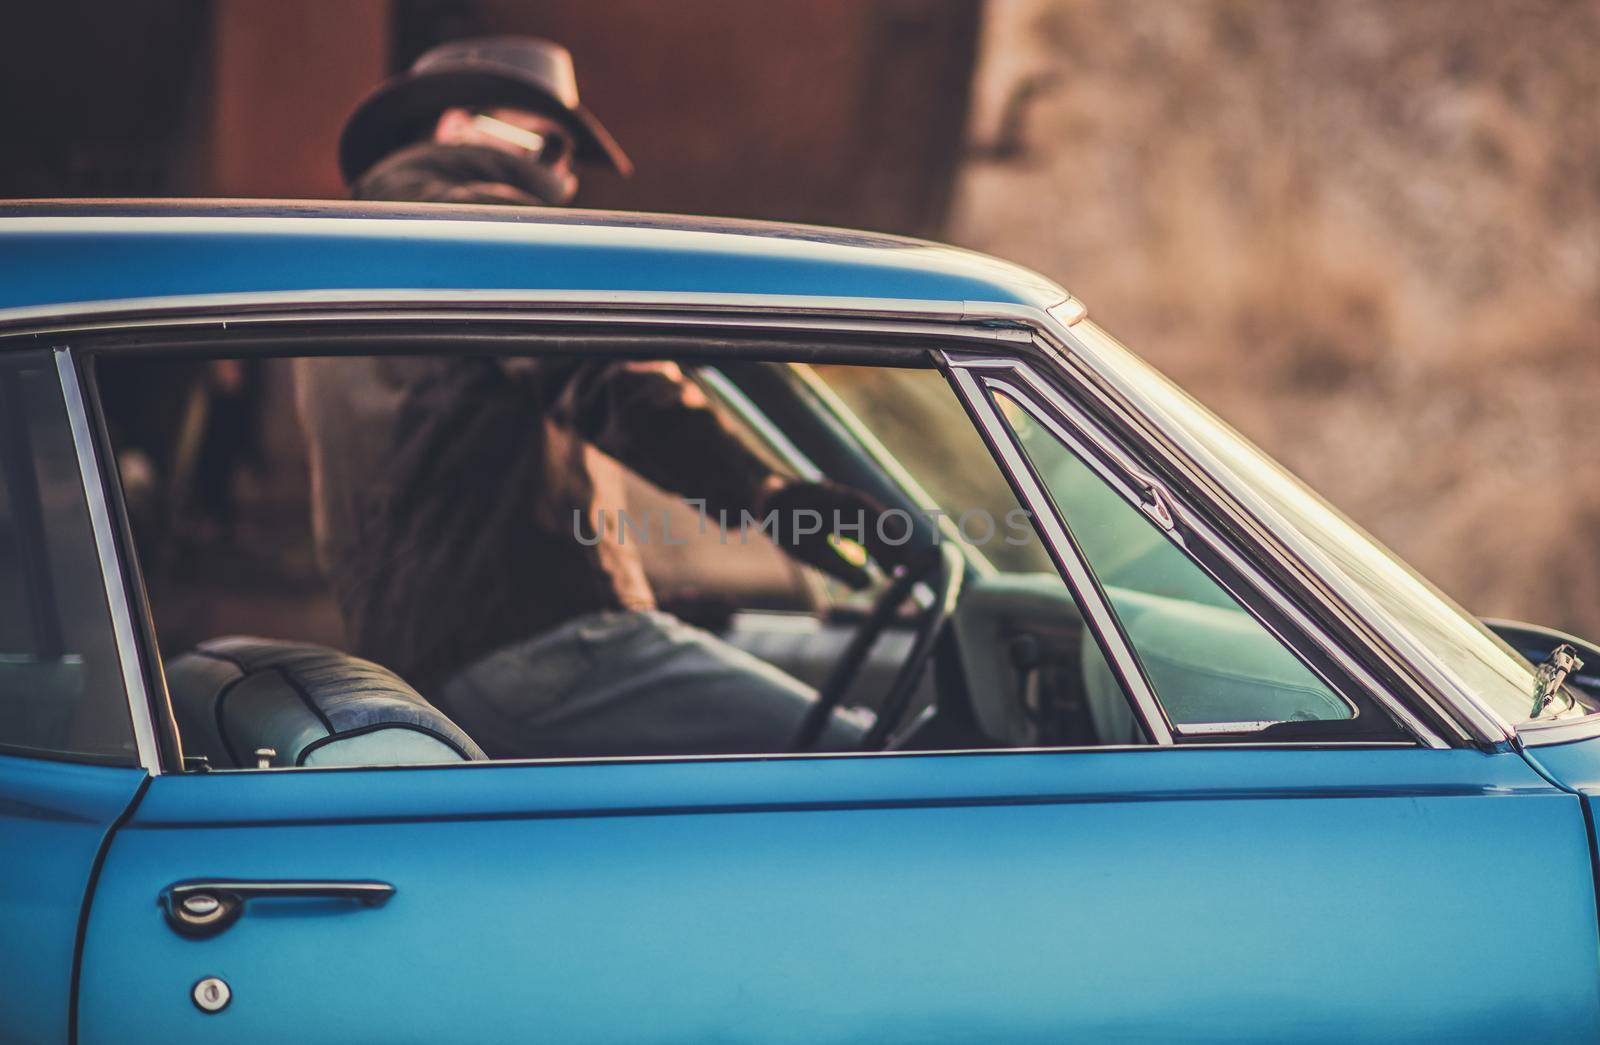 Oldtimer Classic Ride. Caucasian Cowboy Getting Into the Car. Closeup Photo. Transportation and Lifestyle Theme. by welcomia